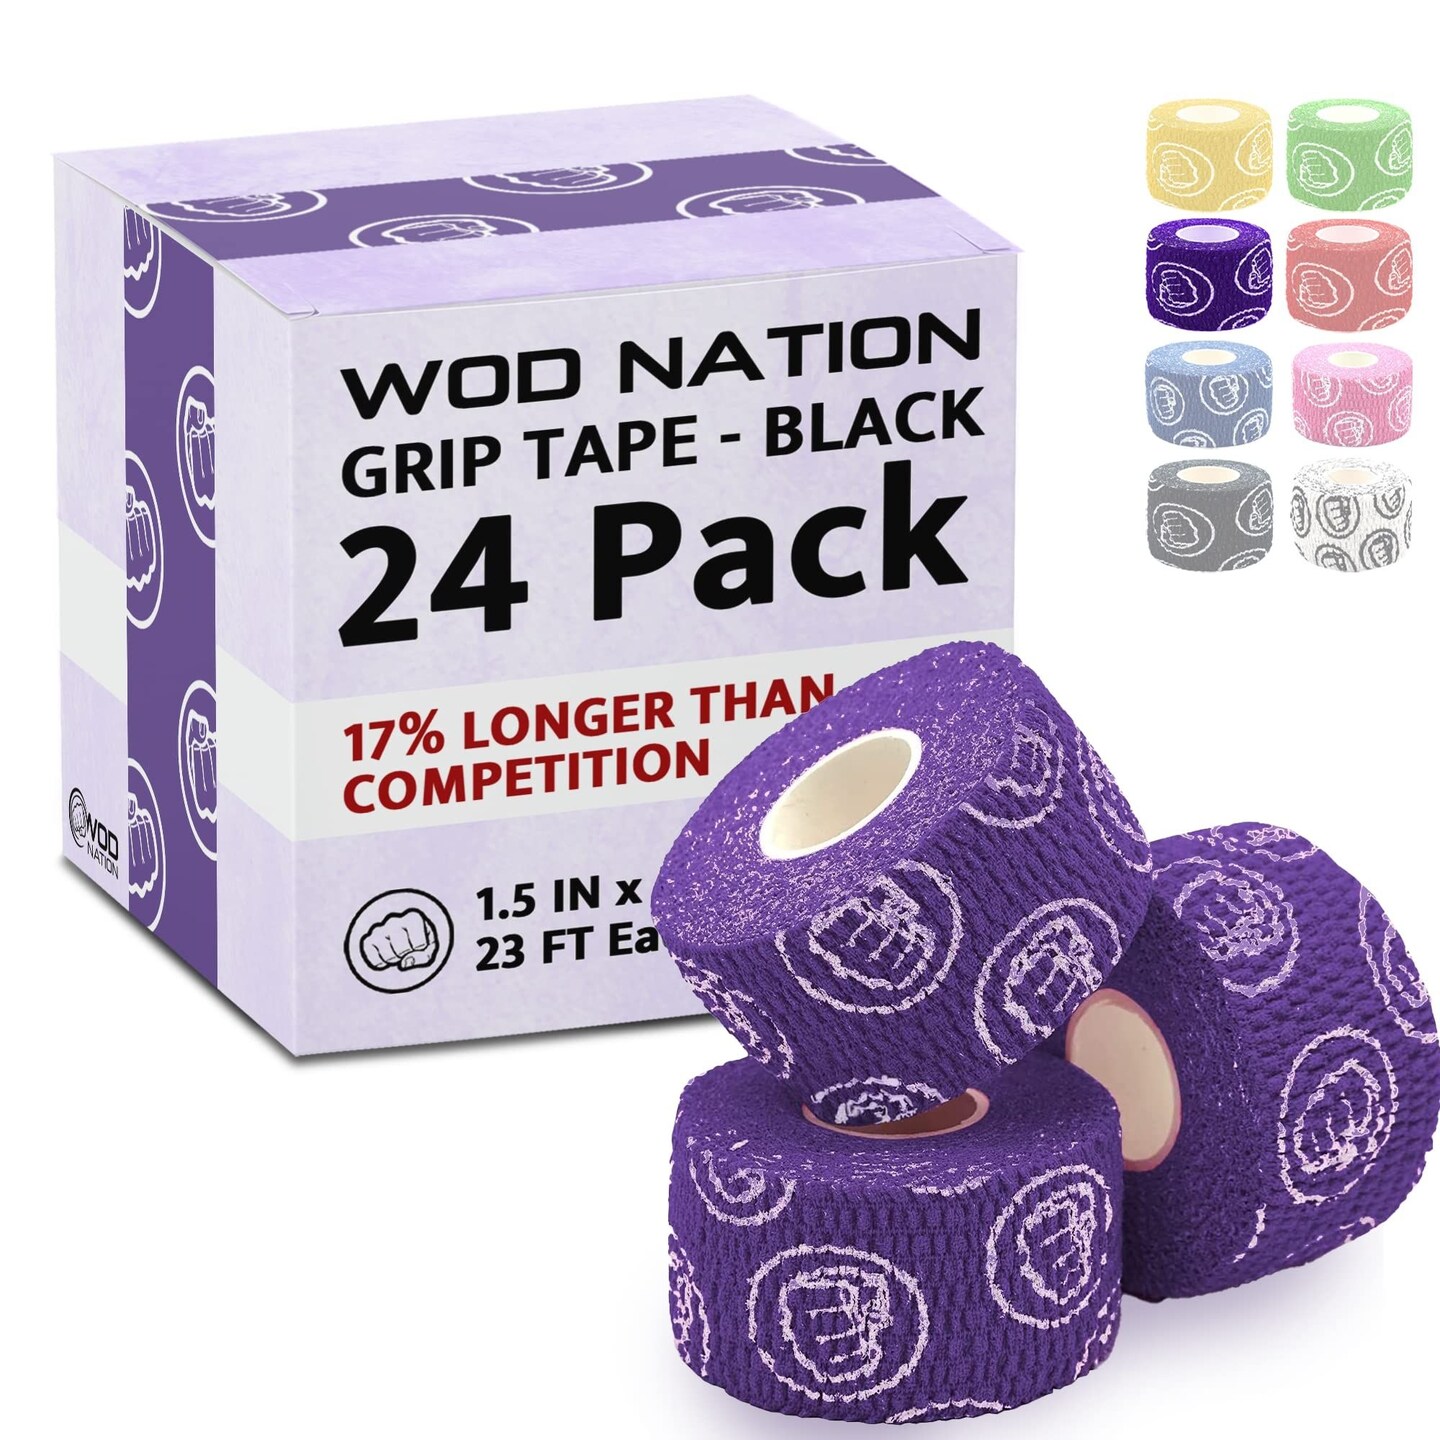 WOD Nation Weightlifting Hook Grip Tape - Bulk 24 Pack 23 Ft/Roll - Comfortable, Stretchy Athletic Tape for Weight Lifting, Cross Training - Thumb, Wrist &#x26; Finger Protection - Purple